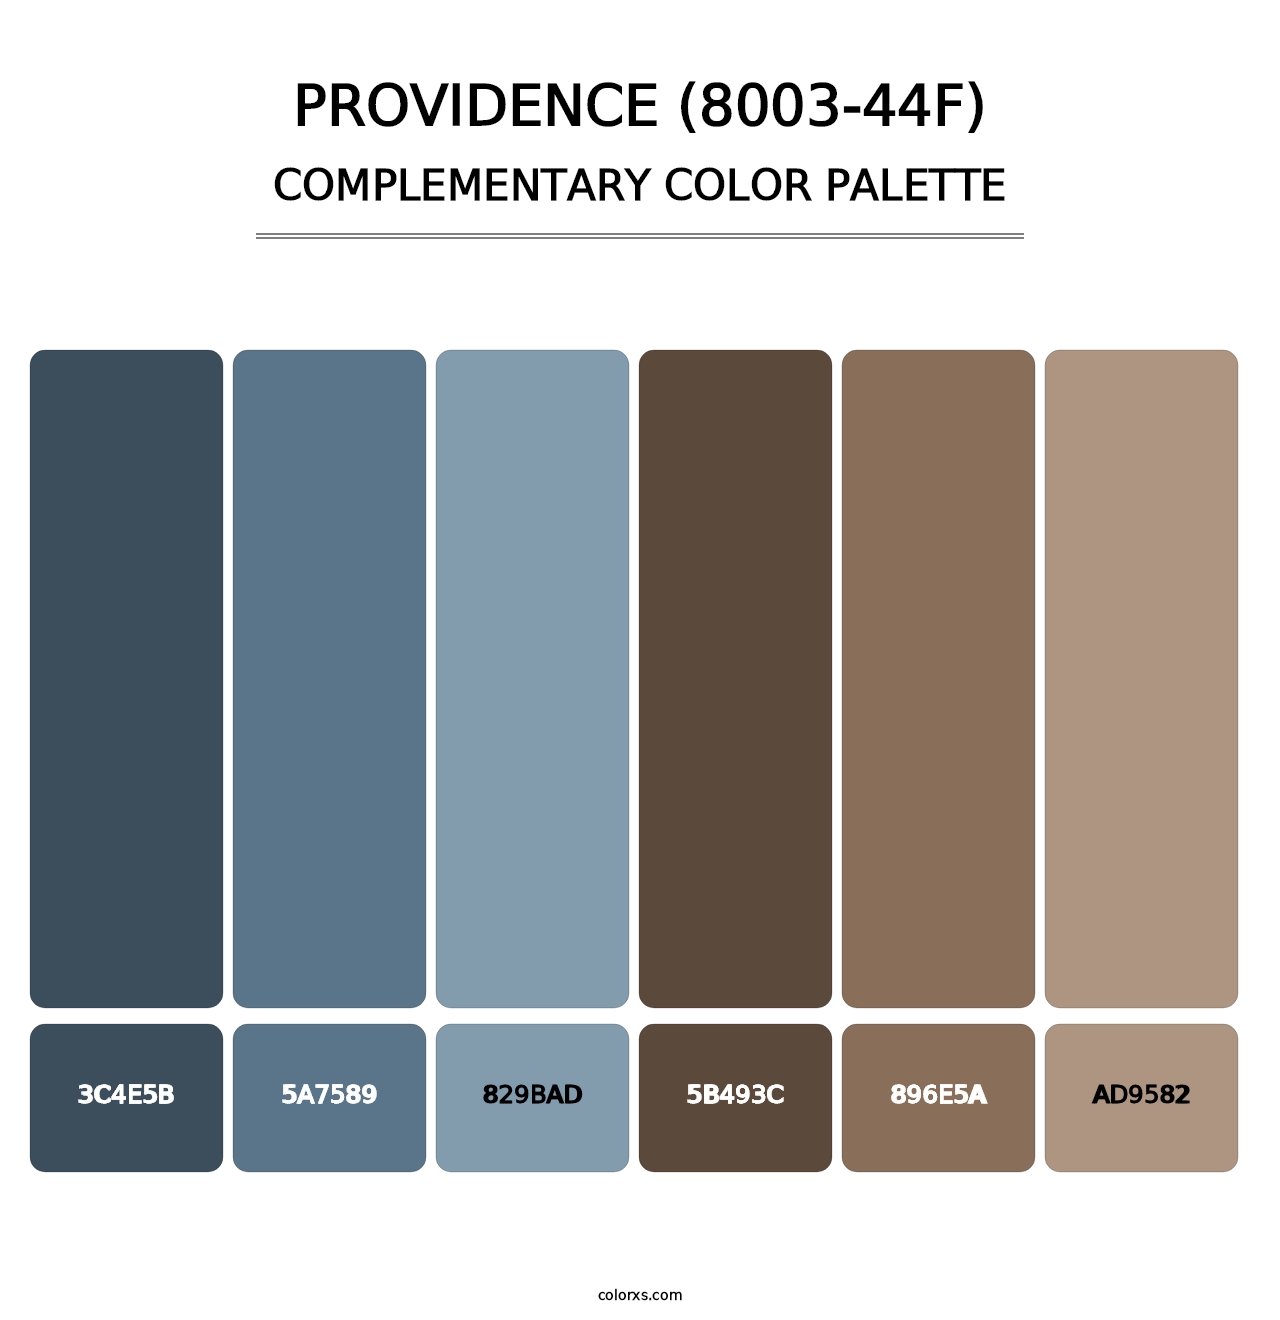 Providence (8003-44F) - Complementary Color Palette